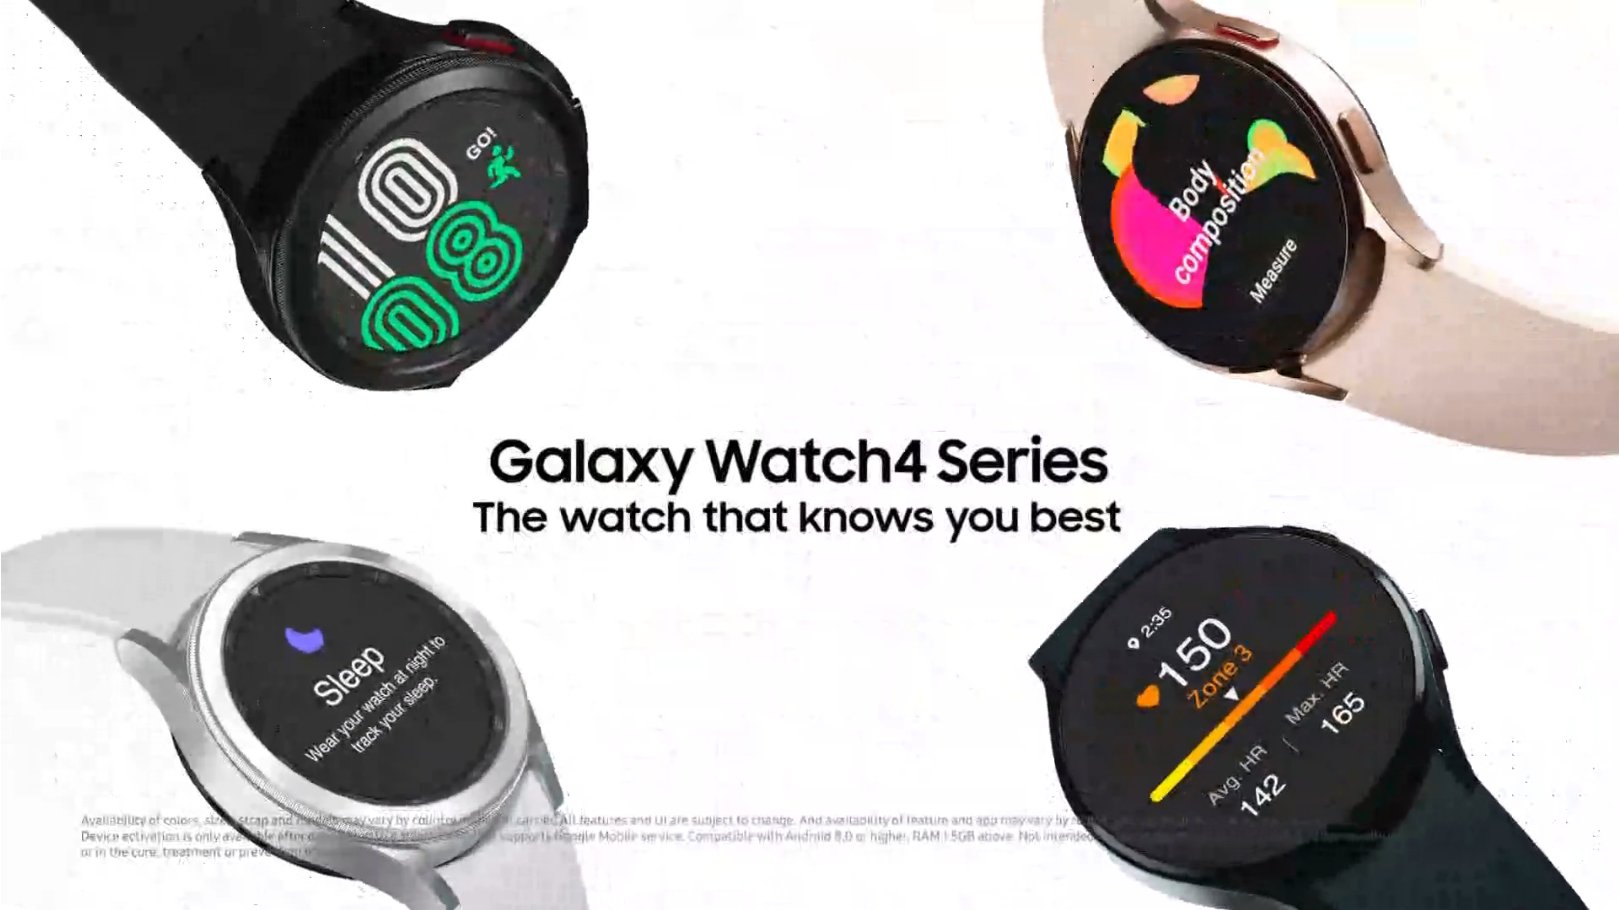 Samsung Galaxy Watch 4 And Galaxy Watch 4 Classic Product Slides Leak Ahead Of August 11 Unveiling Notebookcheck Net News